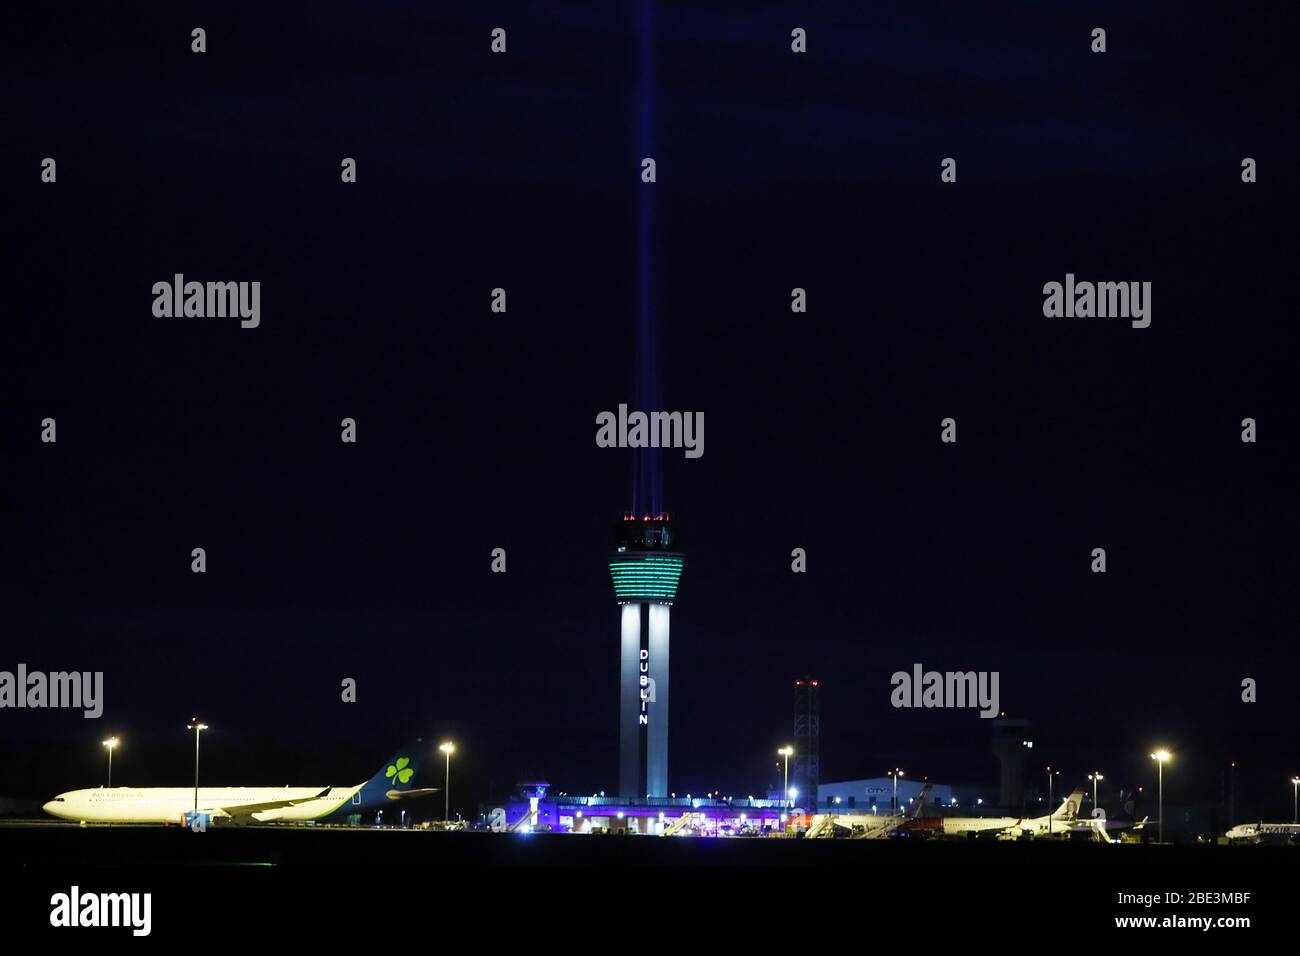 A large beam of light shines out of the new air traffic control tower at Dublin airport as part of the Shine Your Light campaign in tribute to front line health workers and those affected by the coronavirus outbreak. Stock Photo